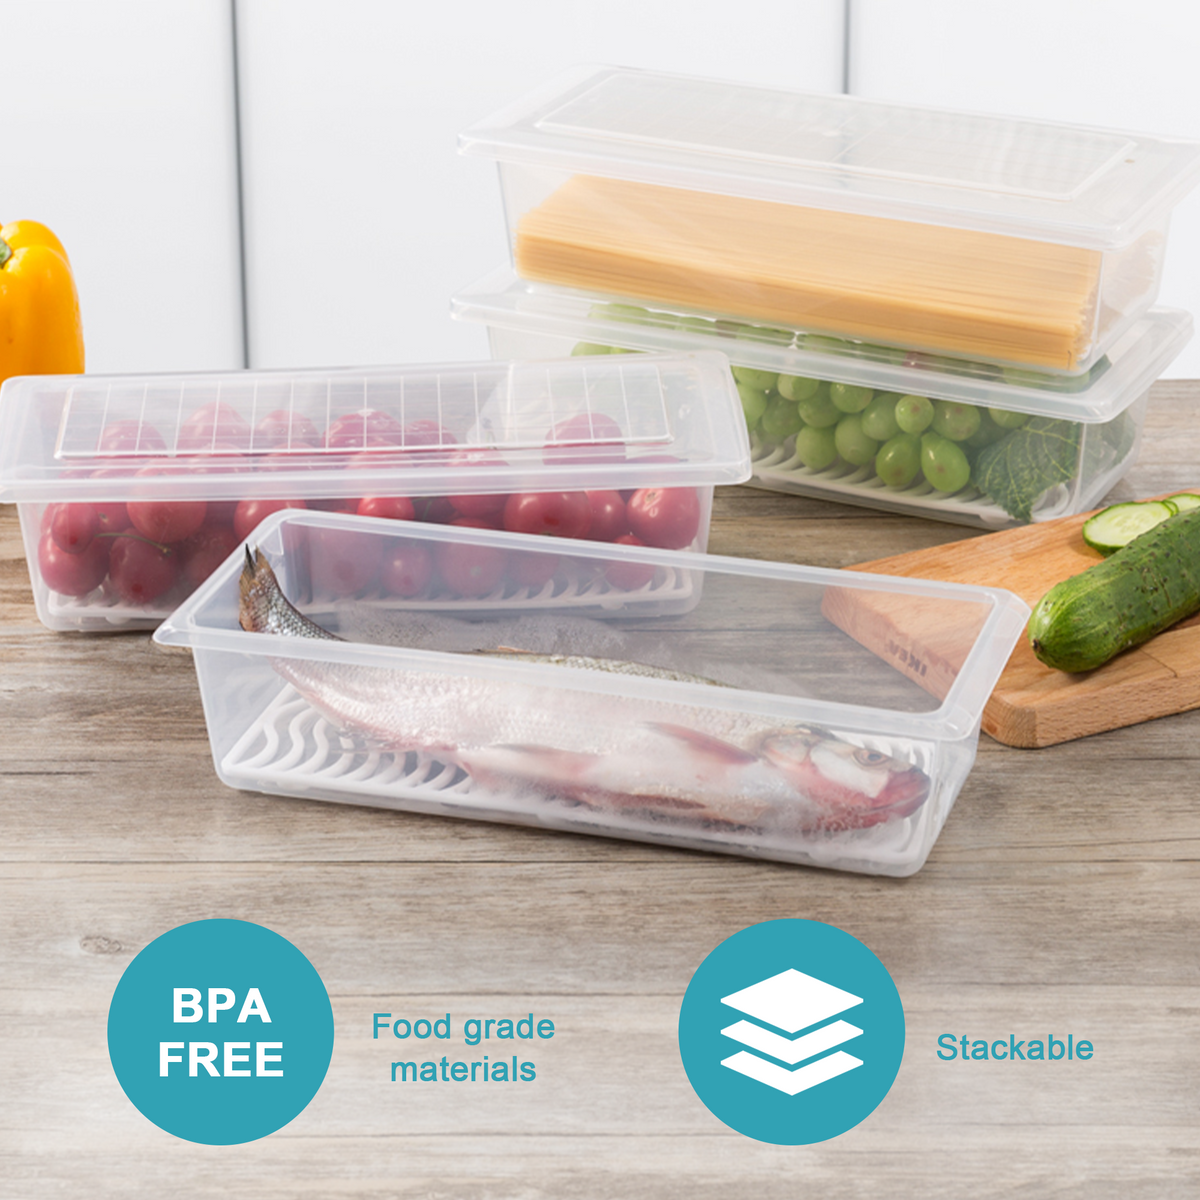 Food Storage Containers, Funtopia 8 Pcs Plastic Fruit Container for Fridge, BPA-Free Produce Saver for Fresh Vegetable, Meal Prep Container with Lids